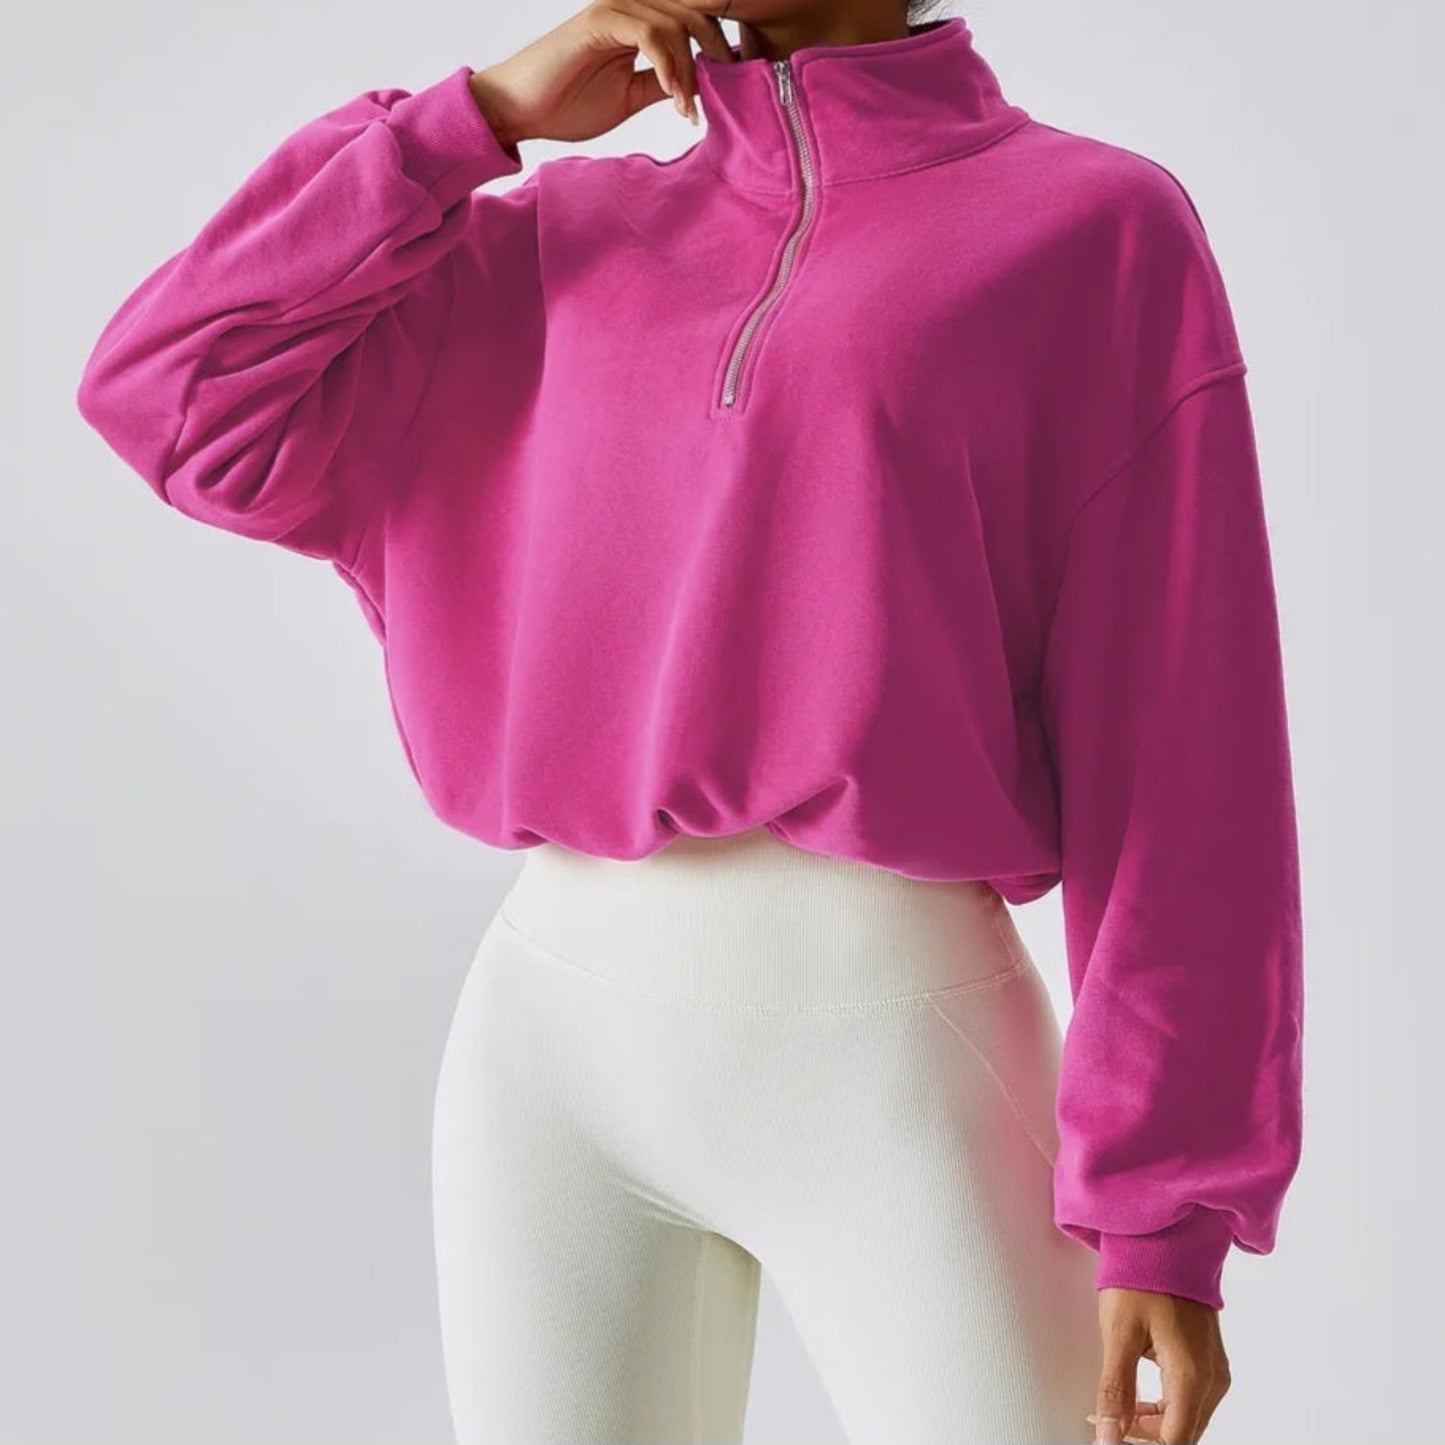 FITNESS MODEL WEARING A  HOT BARBIE PINK, CROPPED, PAPER BAG SWEAT SHIRT FROM VIBRAS ACTIVEWEAR.